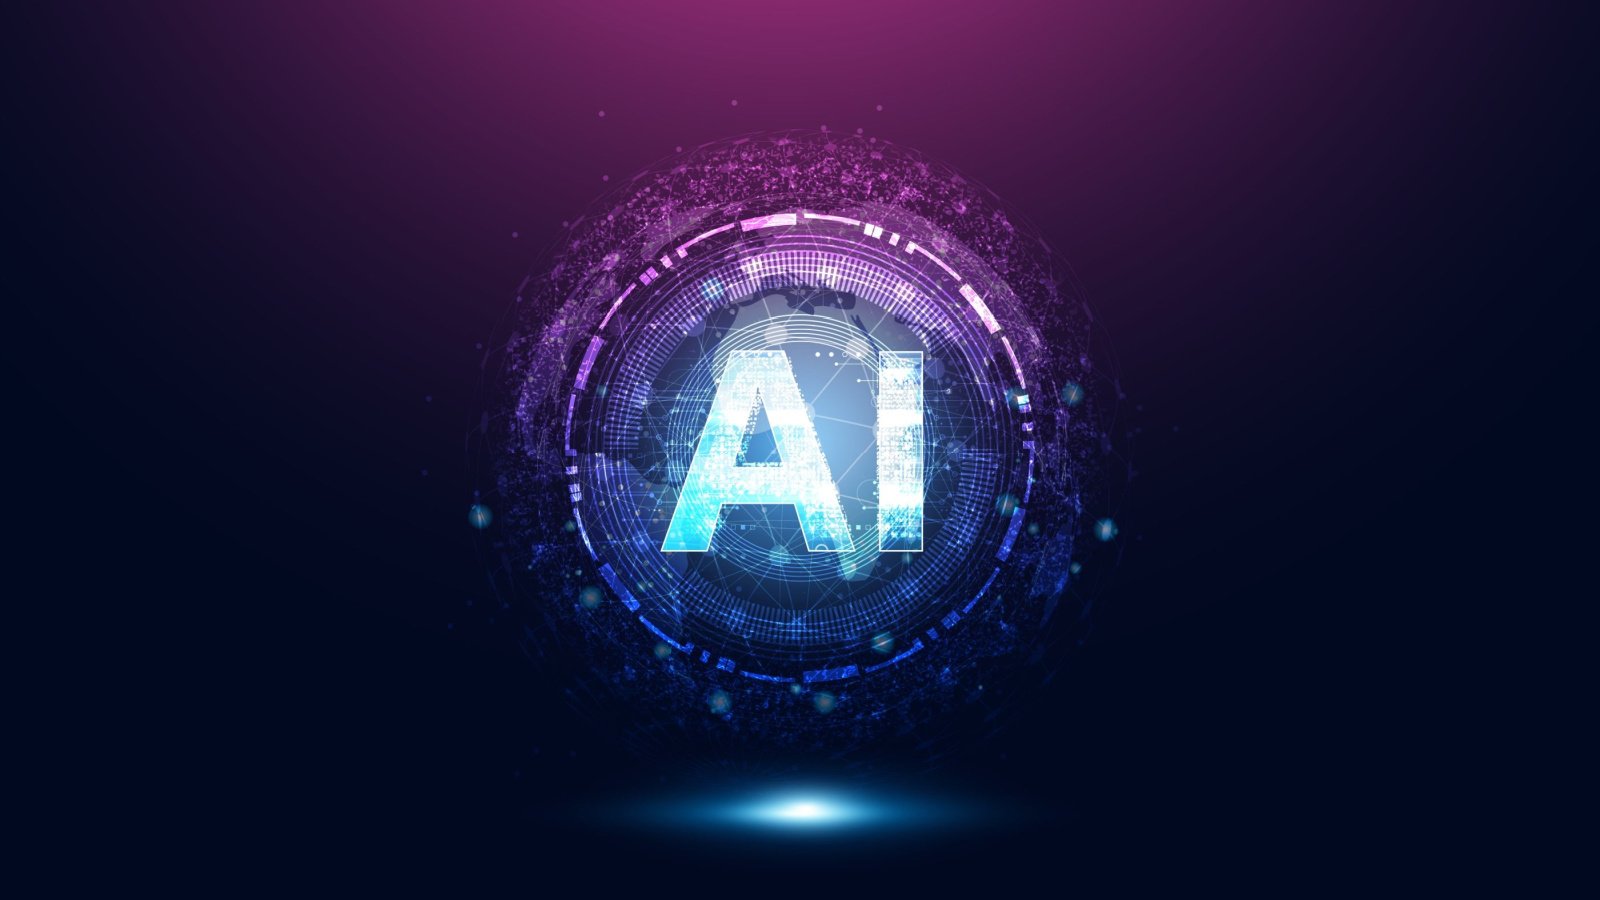 7 AI Stocks That Need to Be on Your Must-Watch List